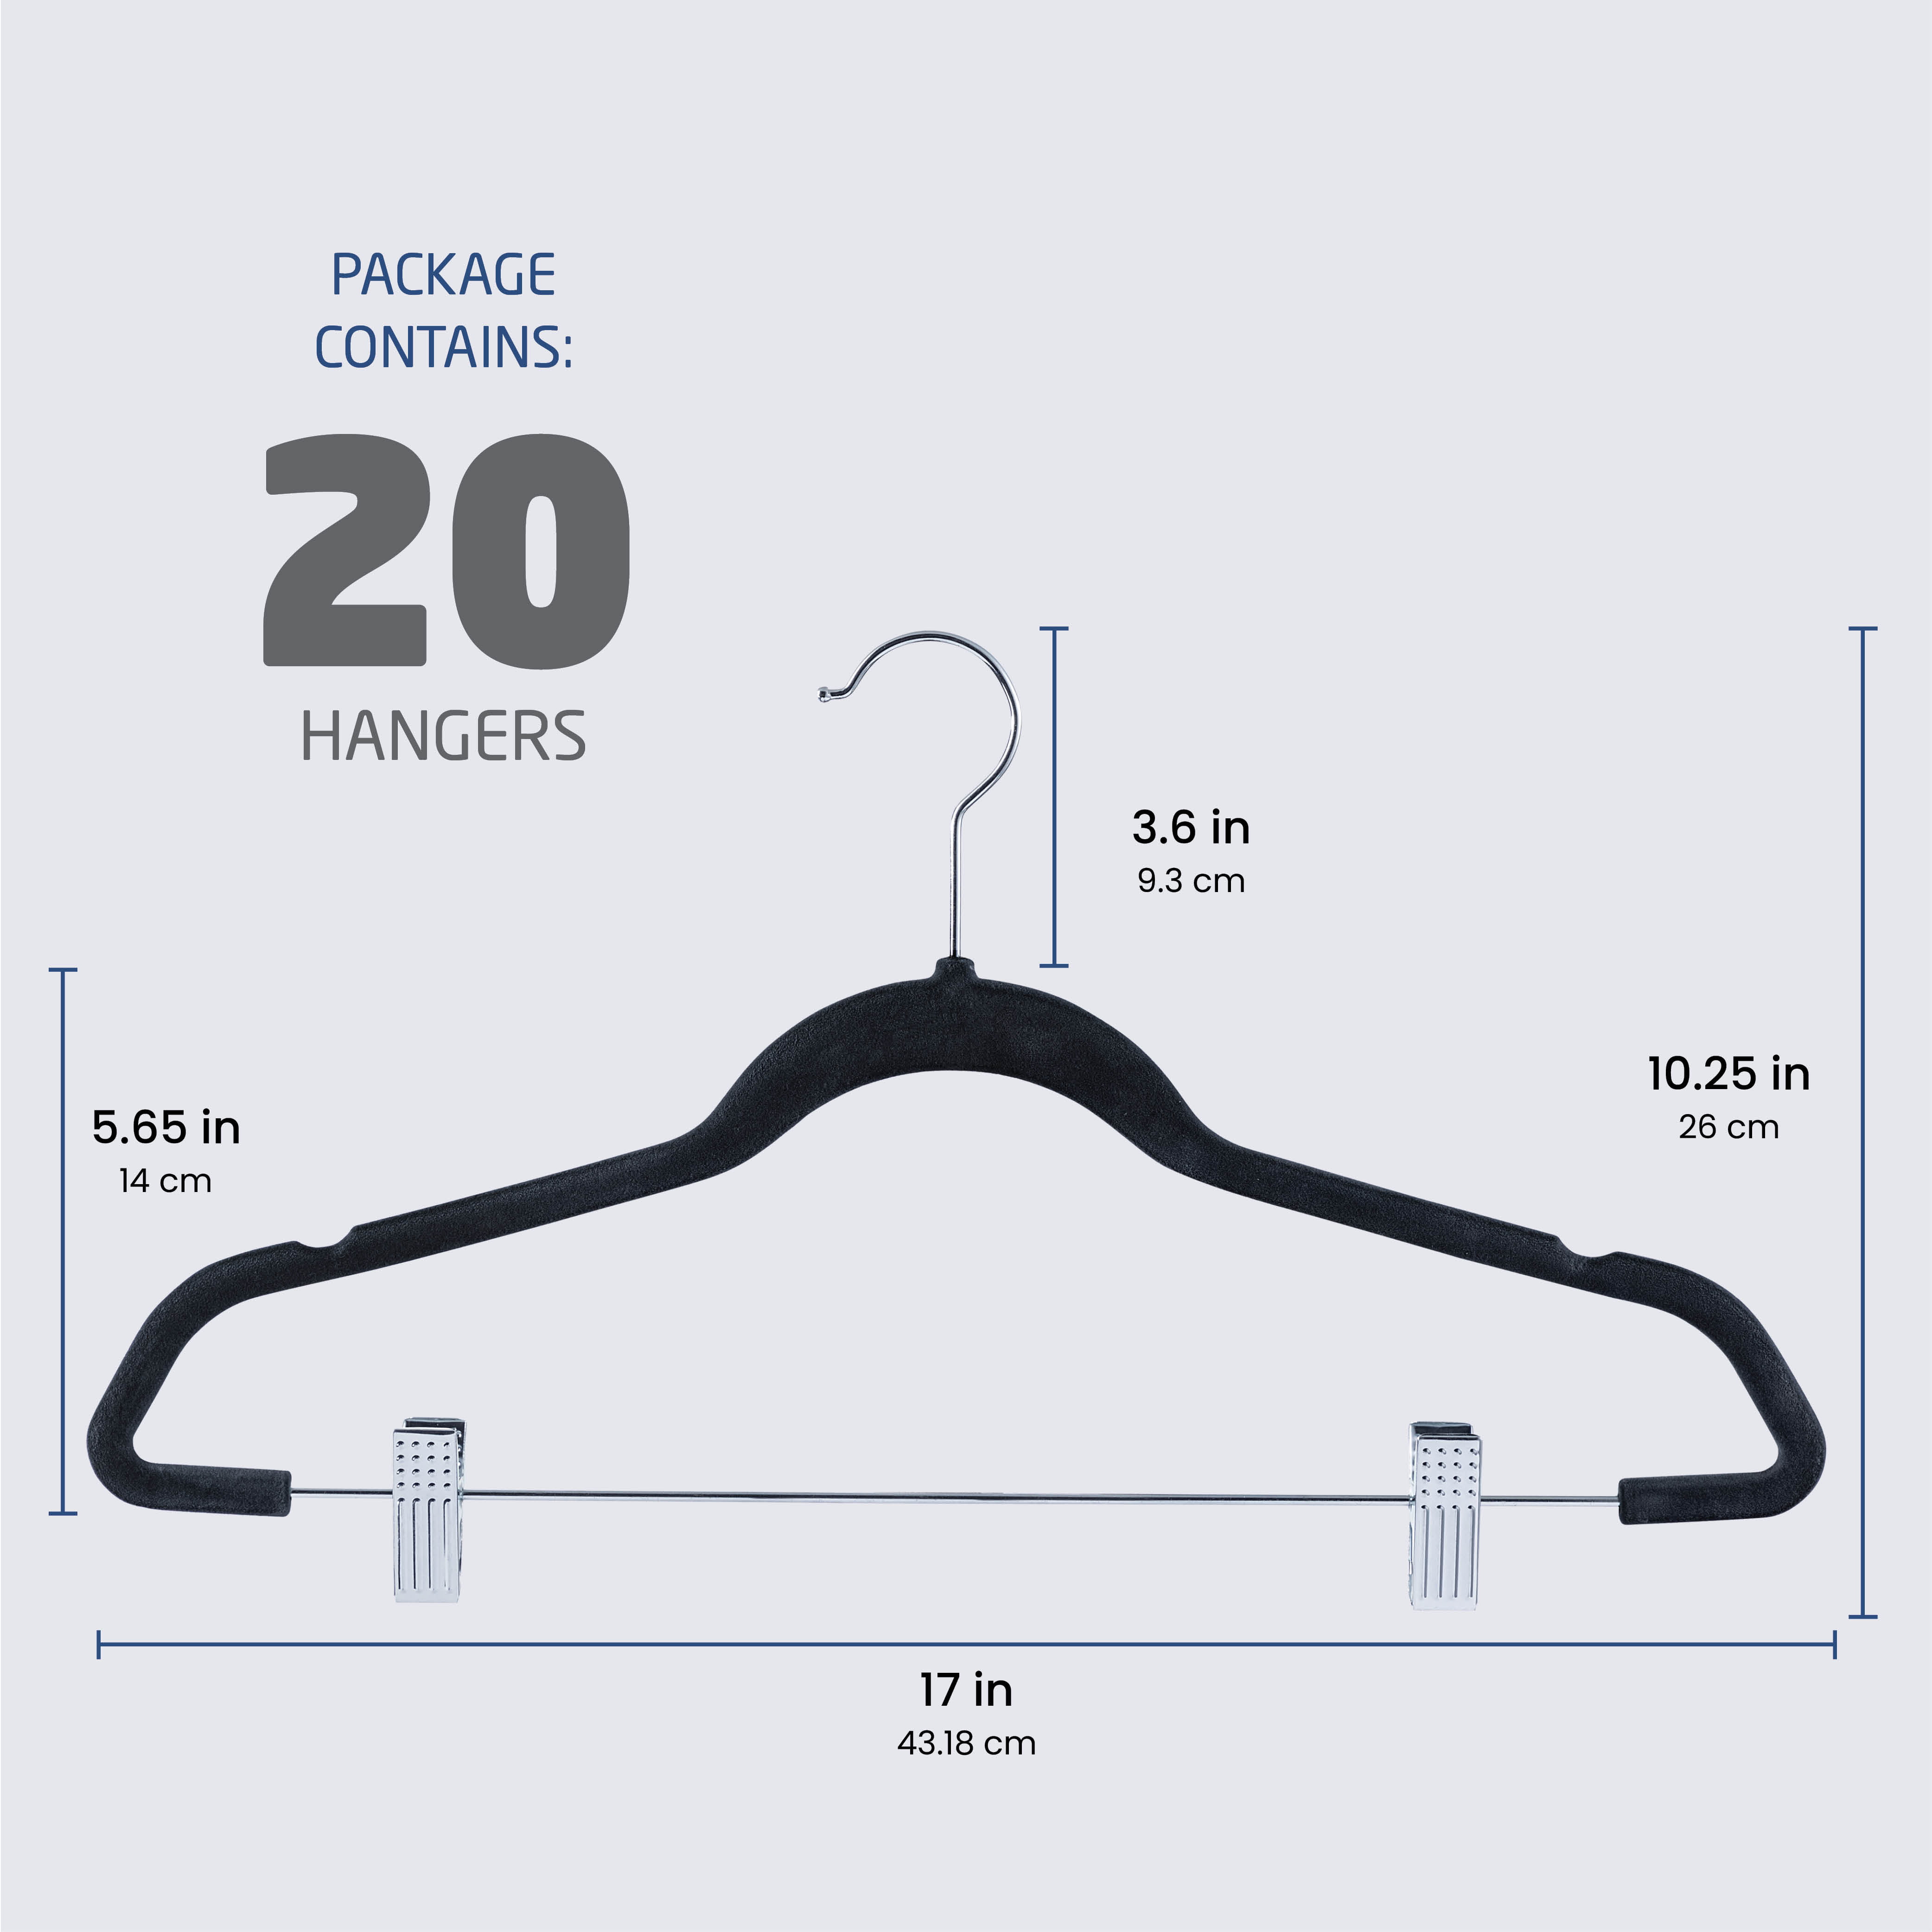 Osto 30 Pack Premium Velvet Hangers, Non-slip Adult Hangers With Pants Bar  And Notches, Thin Space Saving 360-degree Swivel Hook Ivory : Target